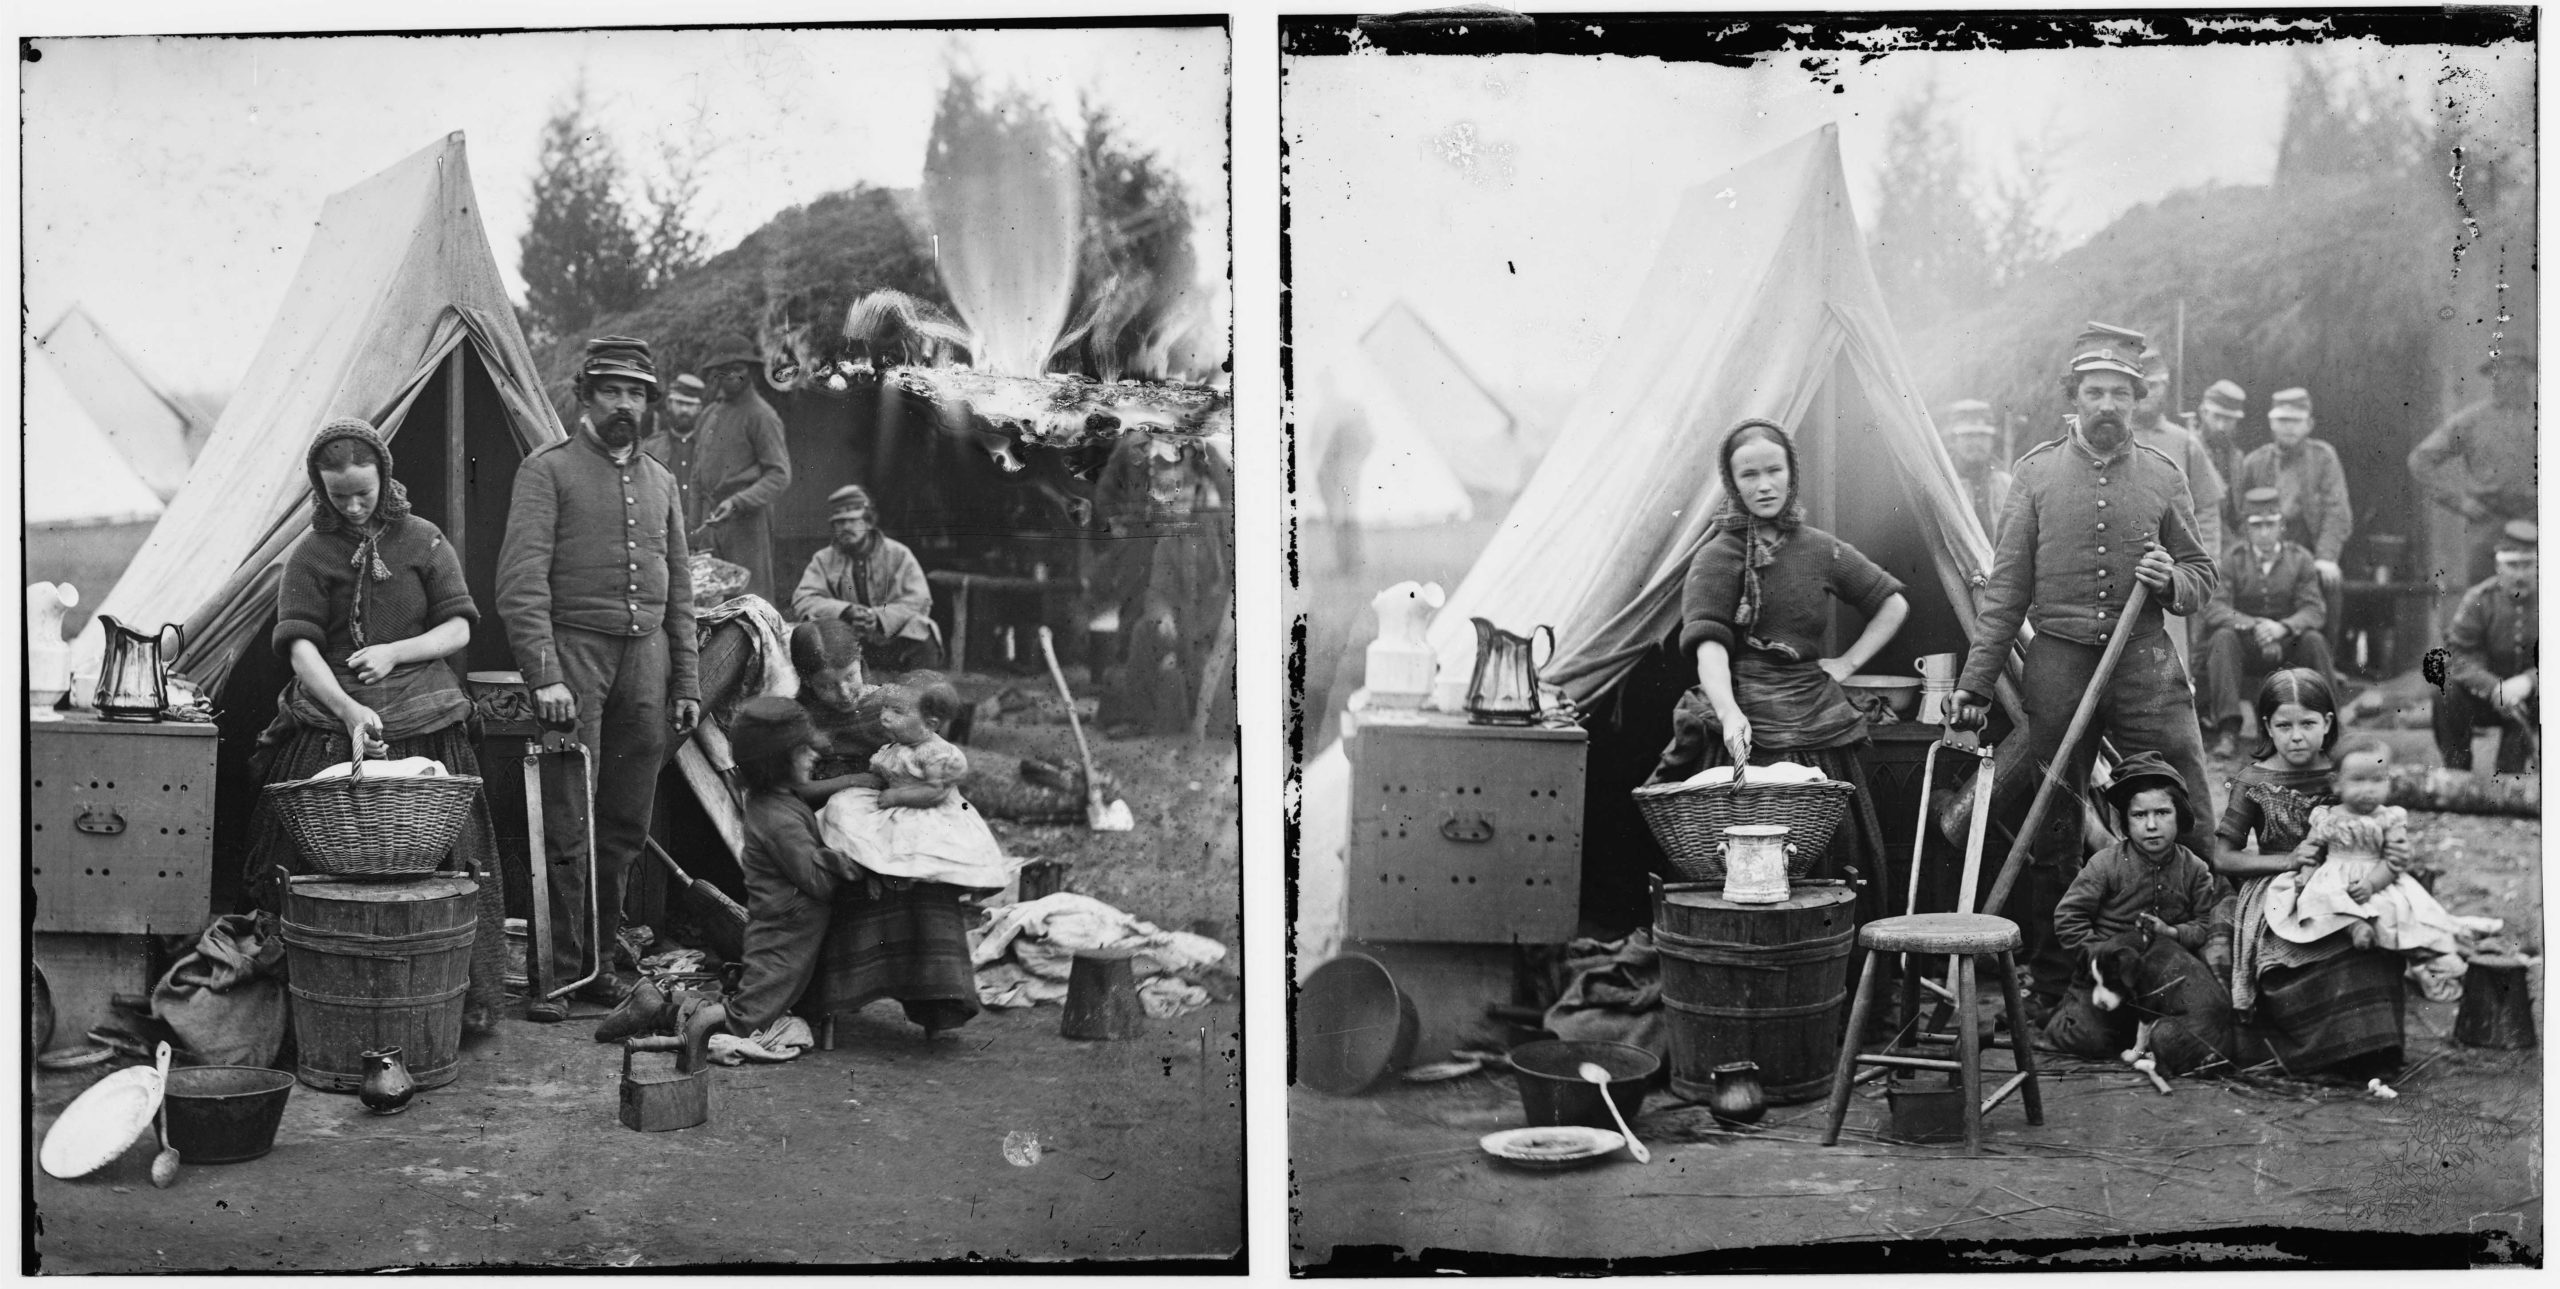 <em>Tent life of the 31st Penn. Inf. (later, 82d Penn. Inf.) at Queen's farm, vicinity of Fort Slocum, Washington, District of Columbia</em>, 1861, two wet-collodion glass negatives (<a href="https://www.loc.gov/pictures/item/2018670712/" target="_blank" rel="noopener">Library of Congress</a>)